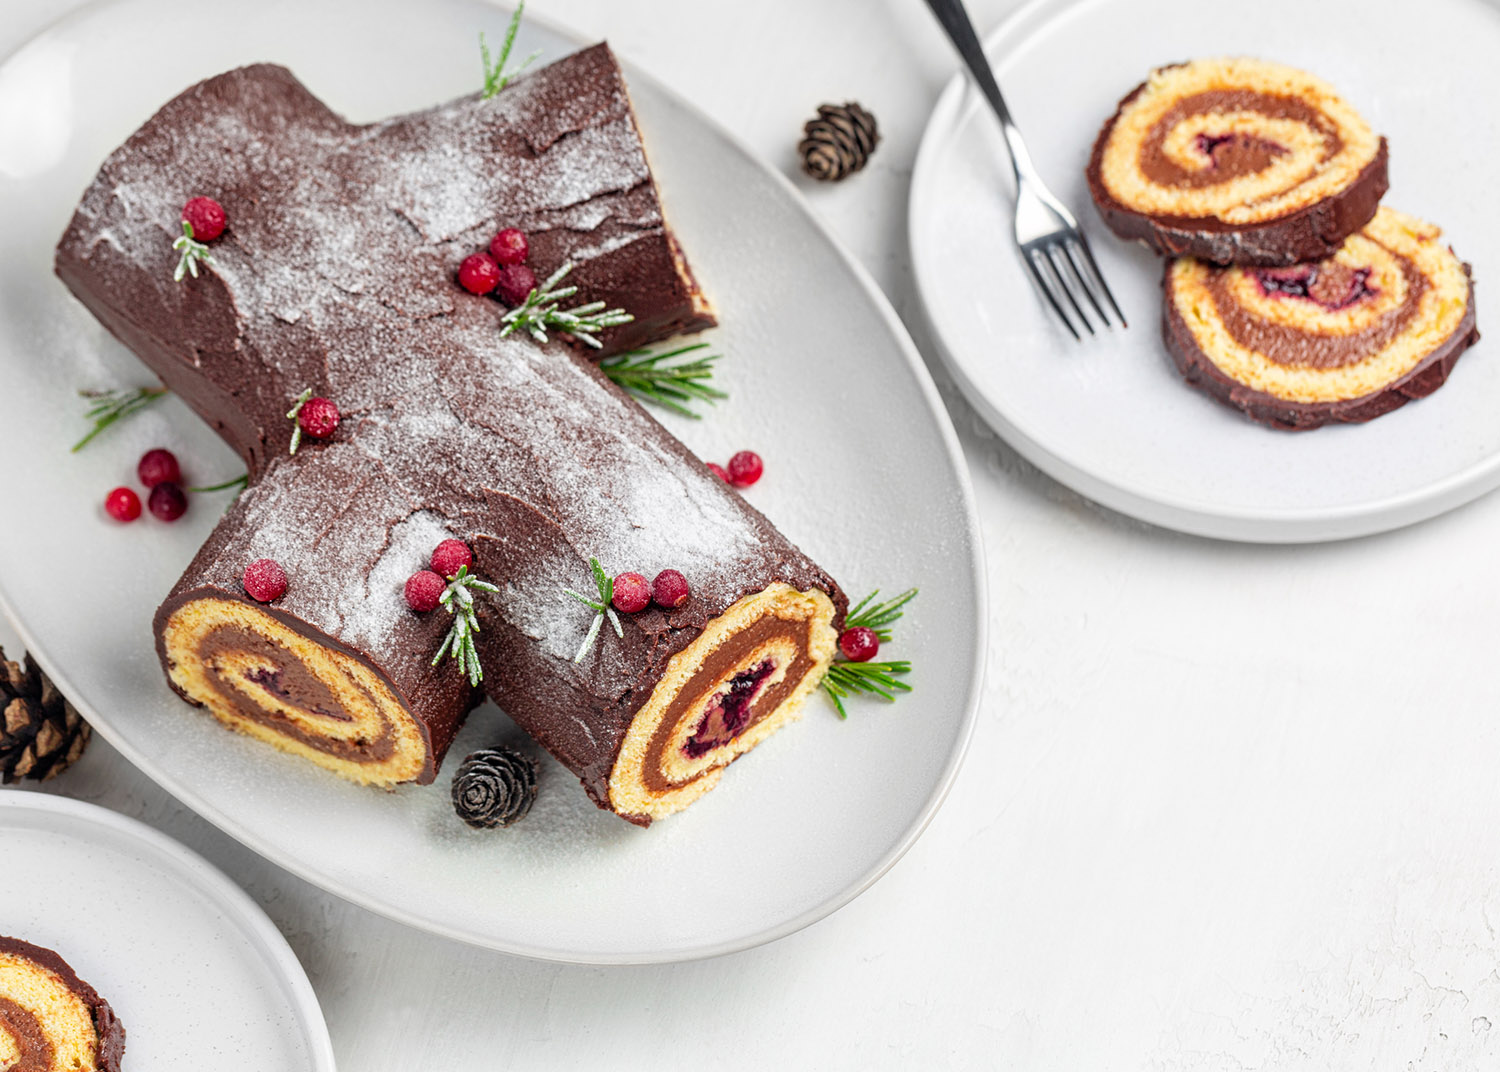 Traditional homemade Christmas cake. Yule log or Buche de Noel. Sponge cake with chocolate cream, ganache, decorated with cranberries. Sliced food, ready for eat.